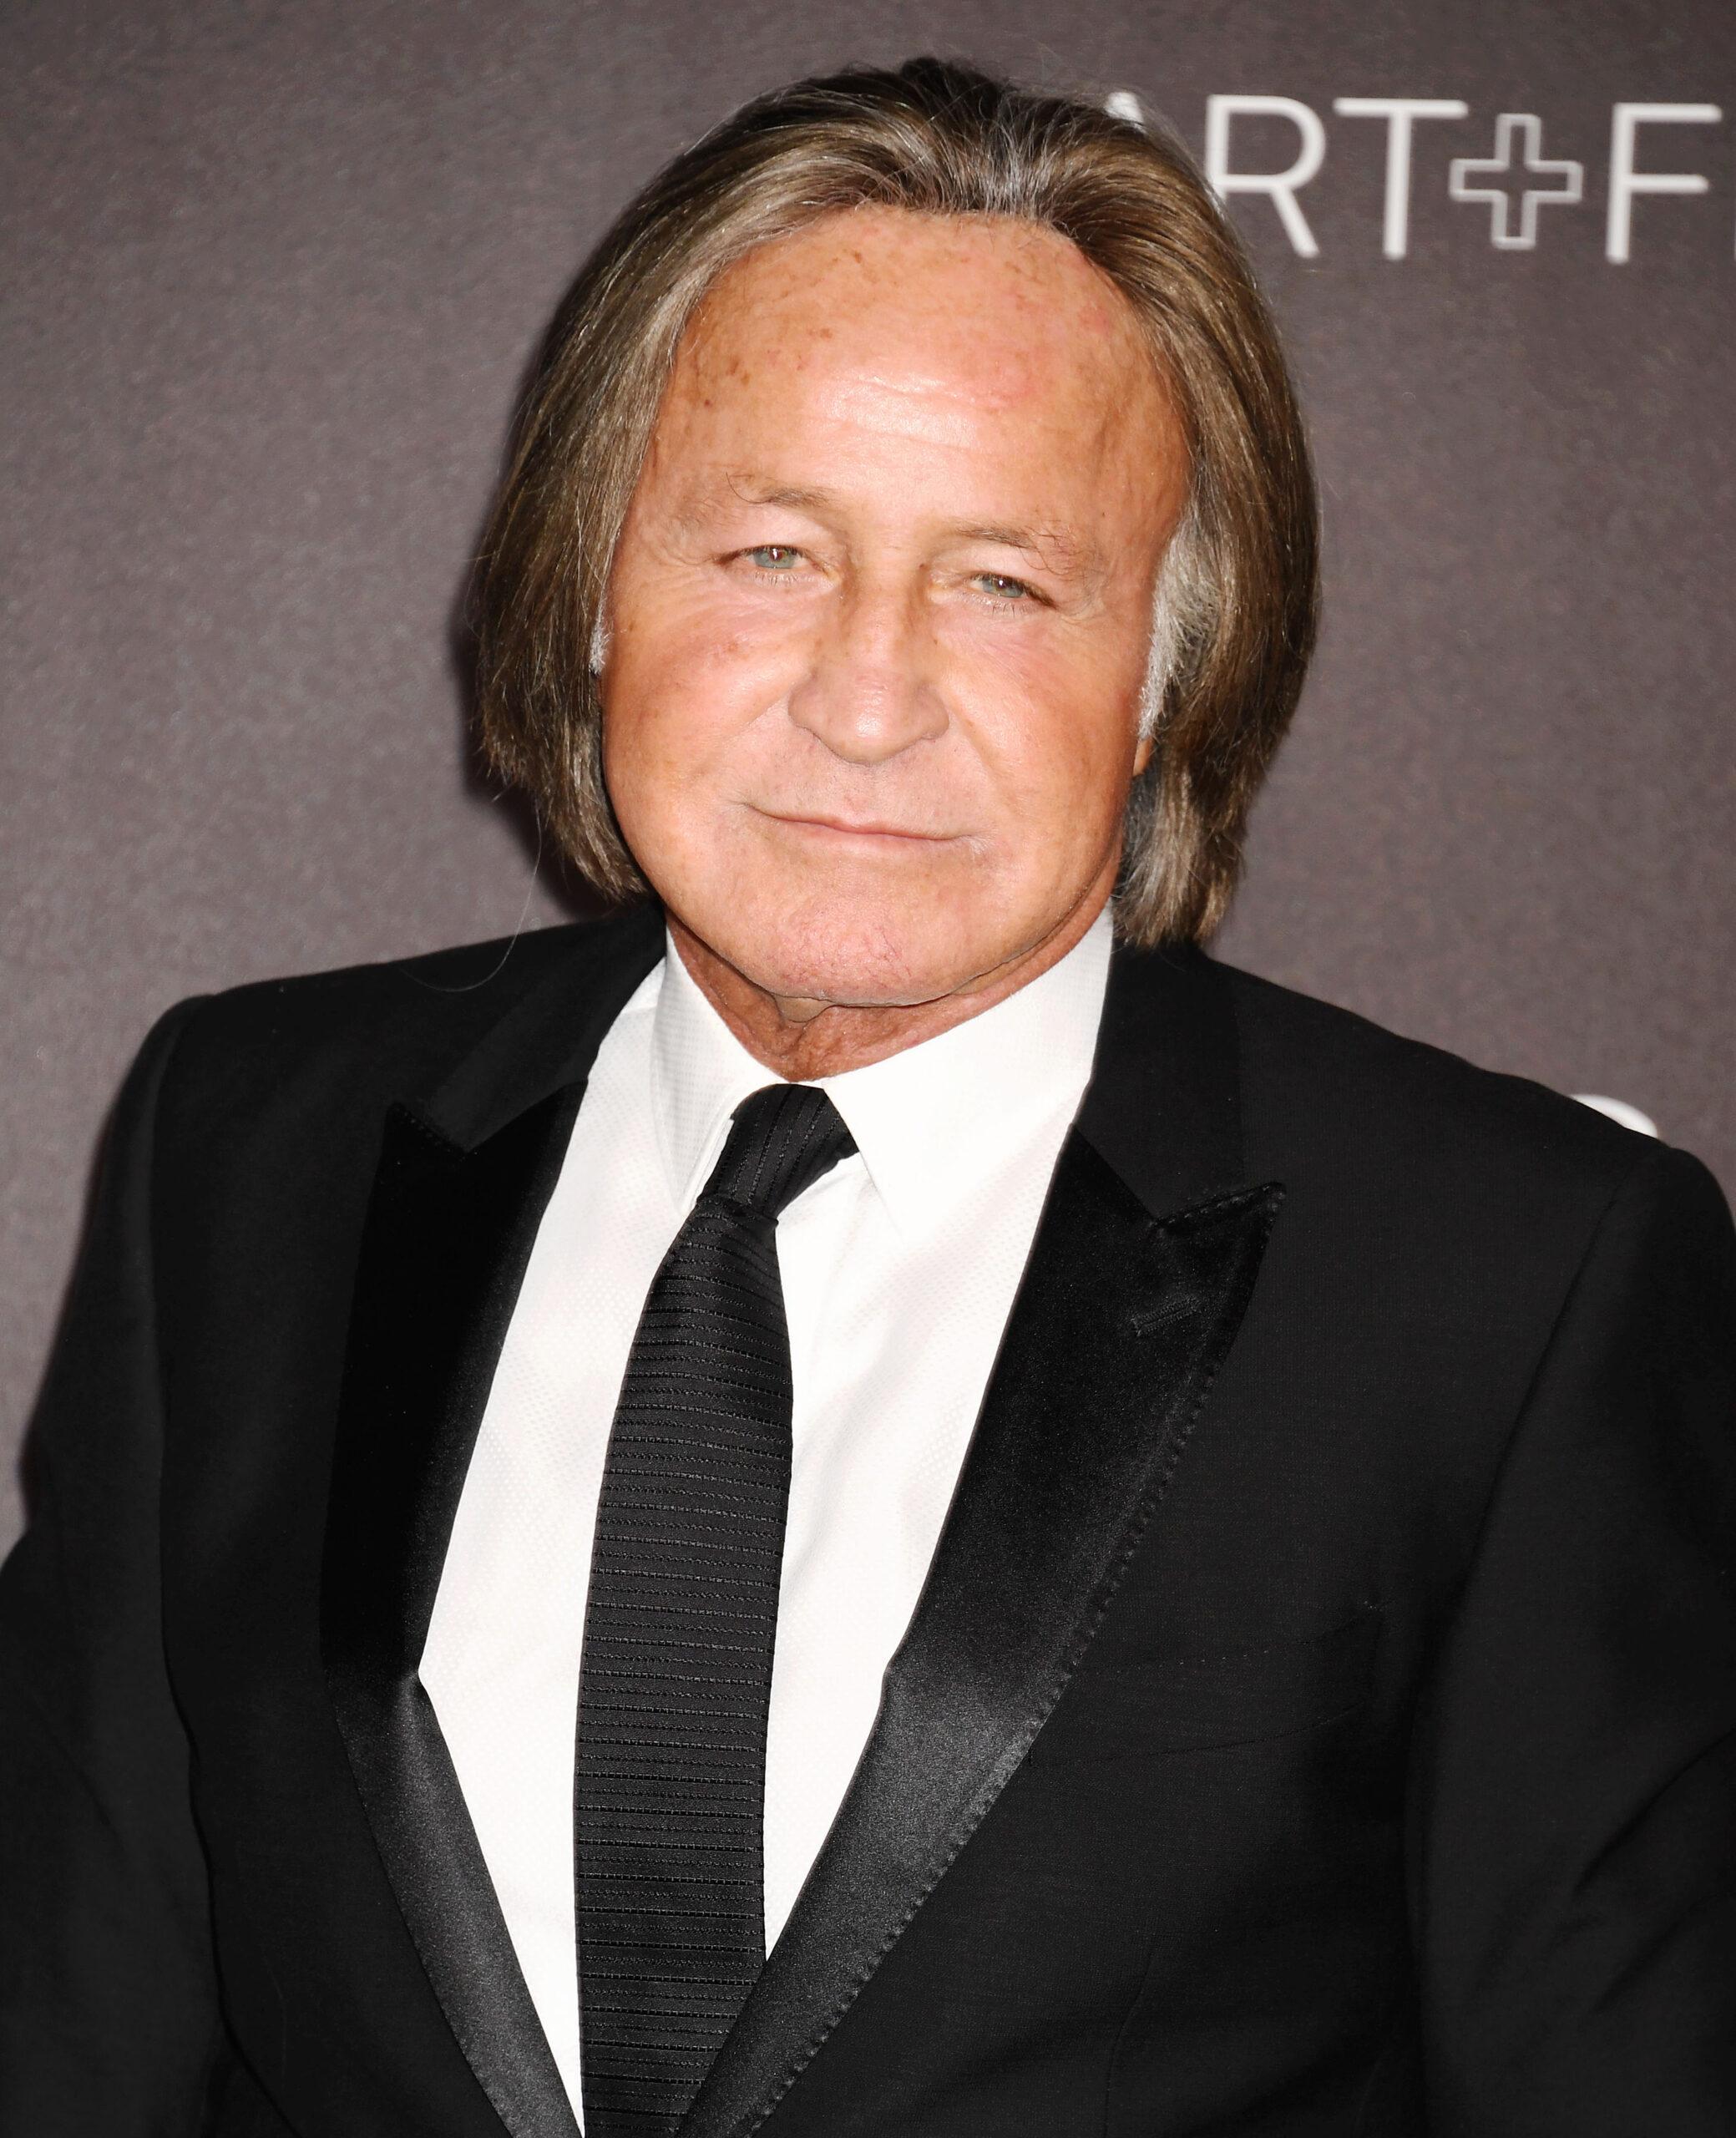 2019 LACMA 2019 Art + Film Gala Presented By Gucci - Arrivals. 02 Nov 2019 Pictured: Mohamed Hadid.